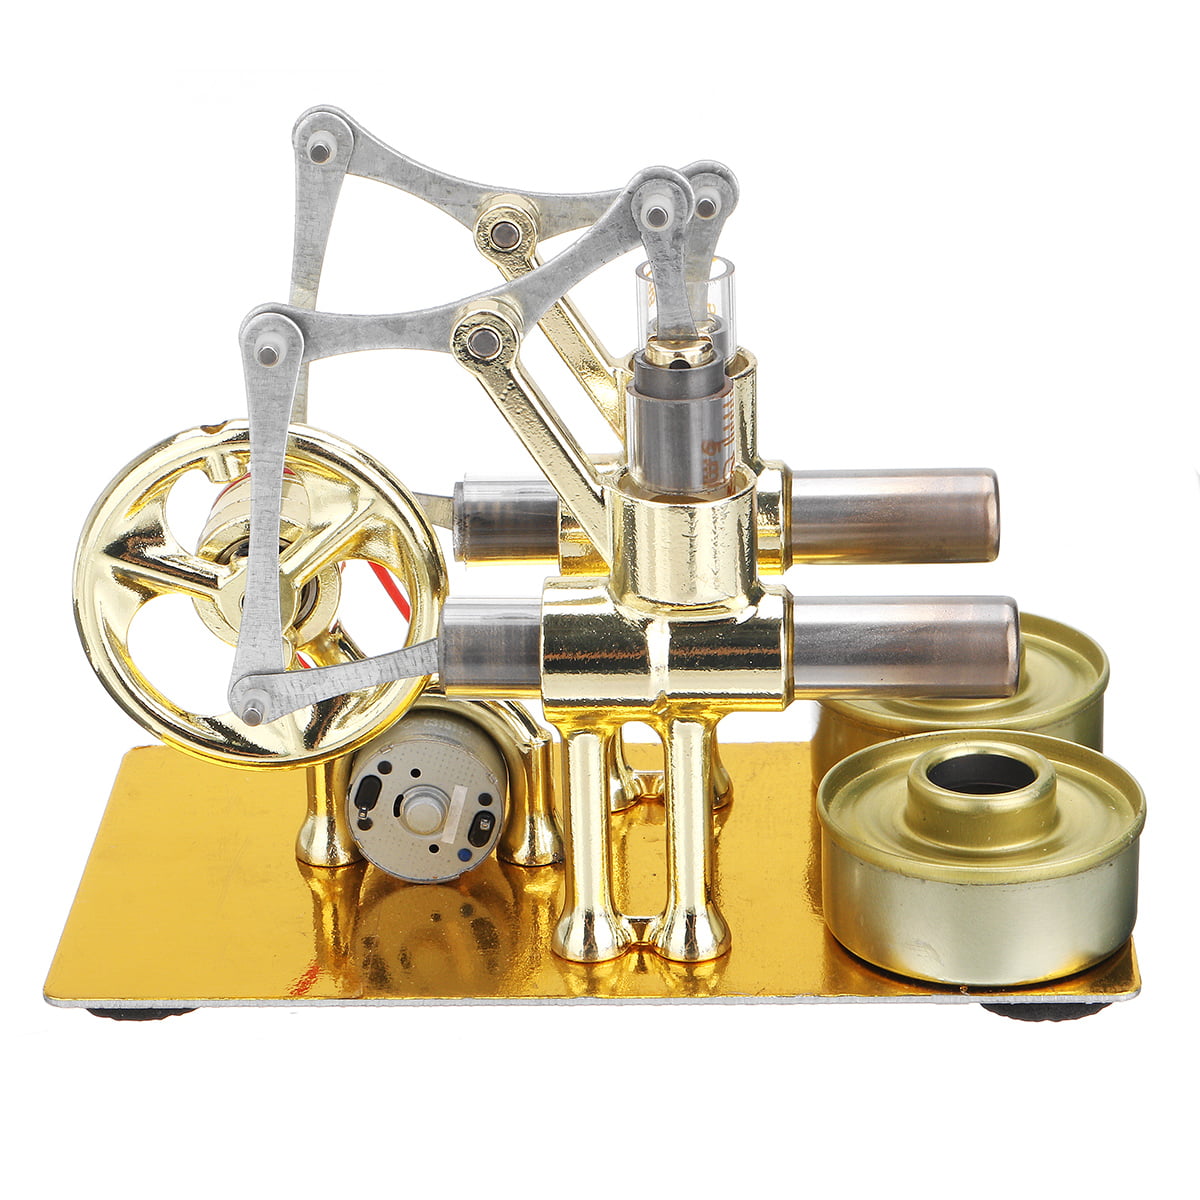 Details about   Double Cylinder Hot Air Stirling Engine Motor Model Light Generator New Toy S0B4 